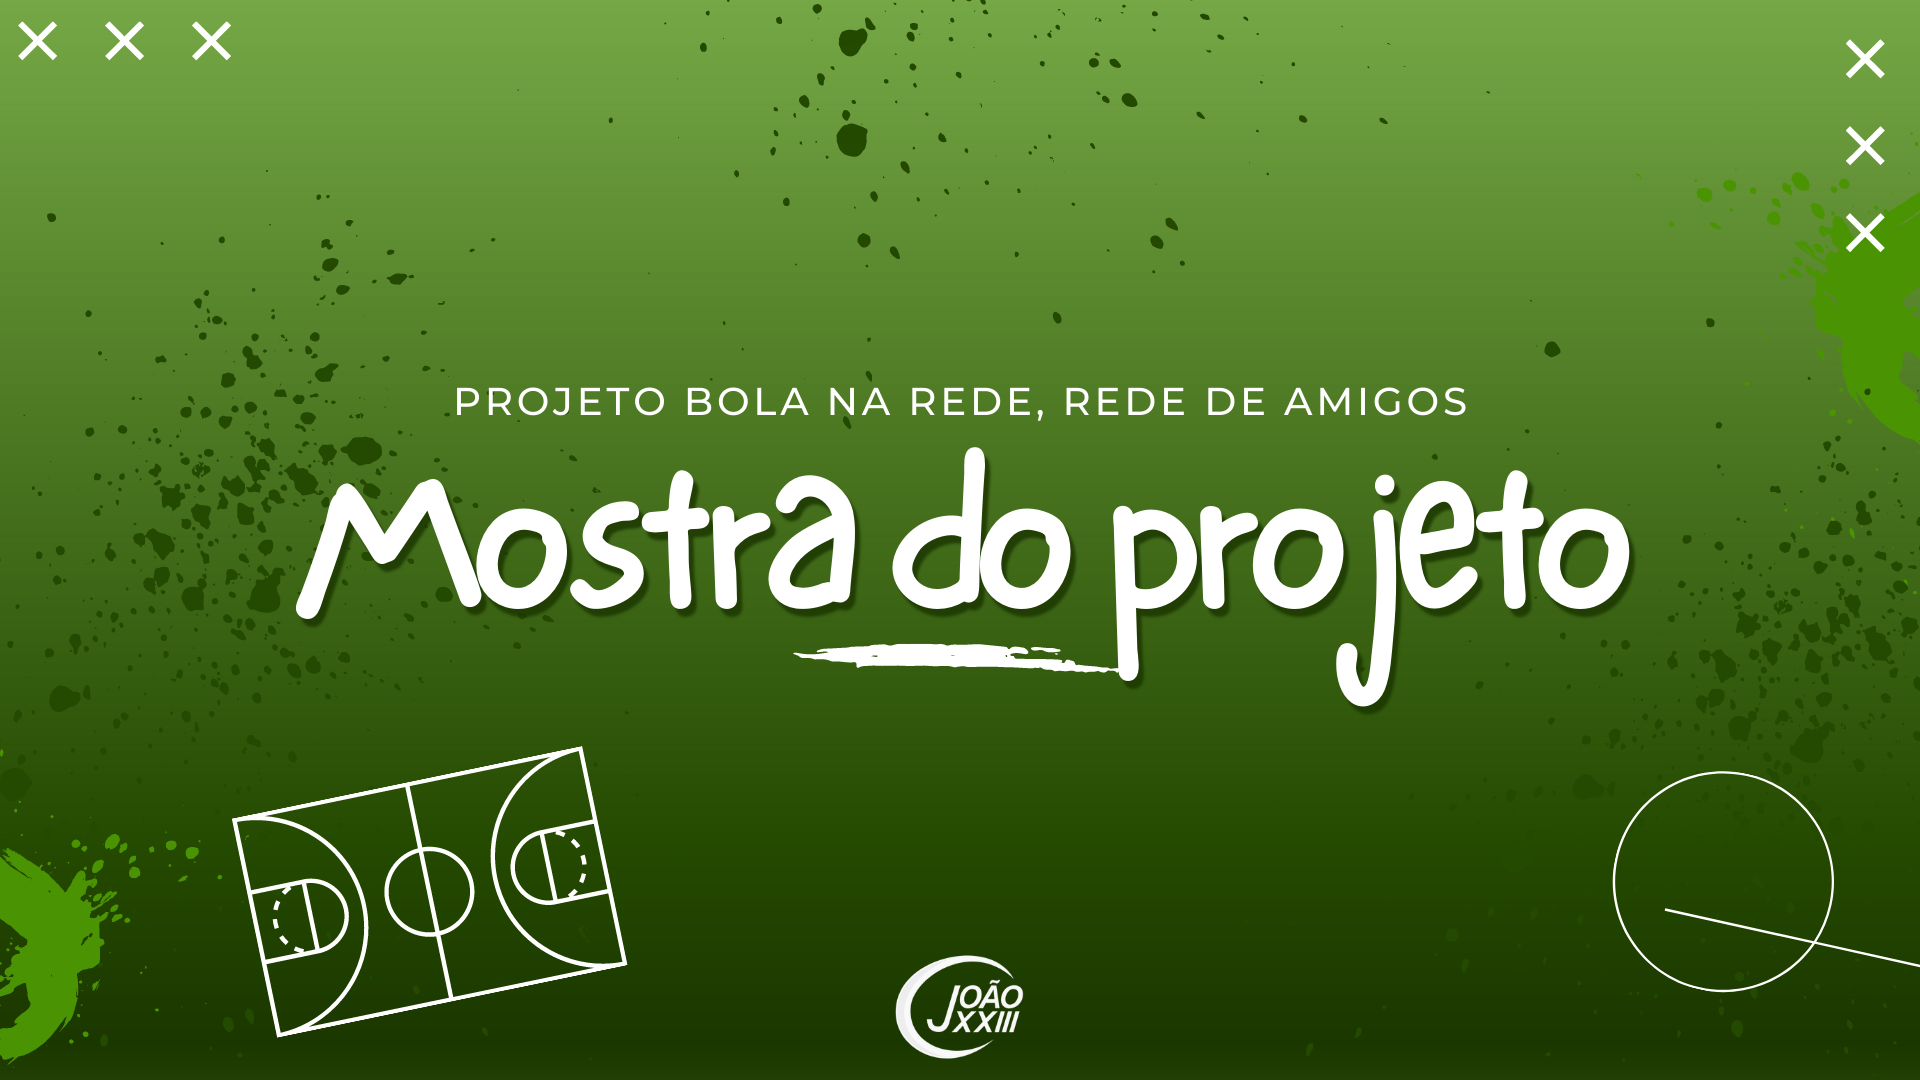 You are currently viewing Mostra do Projeto